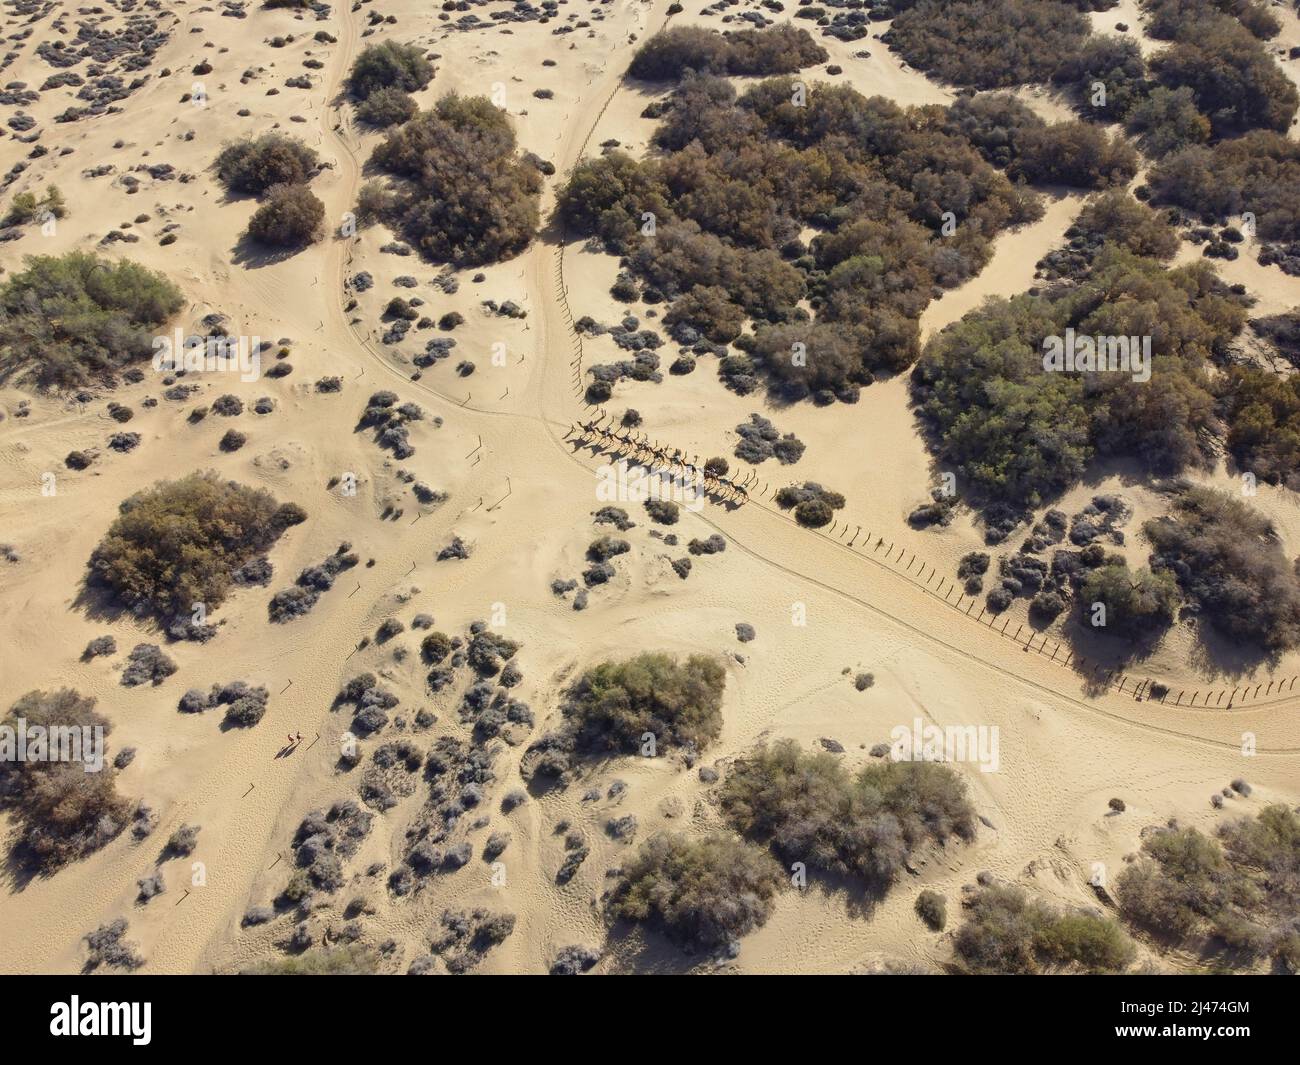 Aerial drone image of a line of camels during a safari tour on sand desert dunes in Maspalomas, Gran Canaria, Canary Islands, Spain. Stock Photo